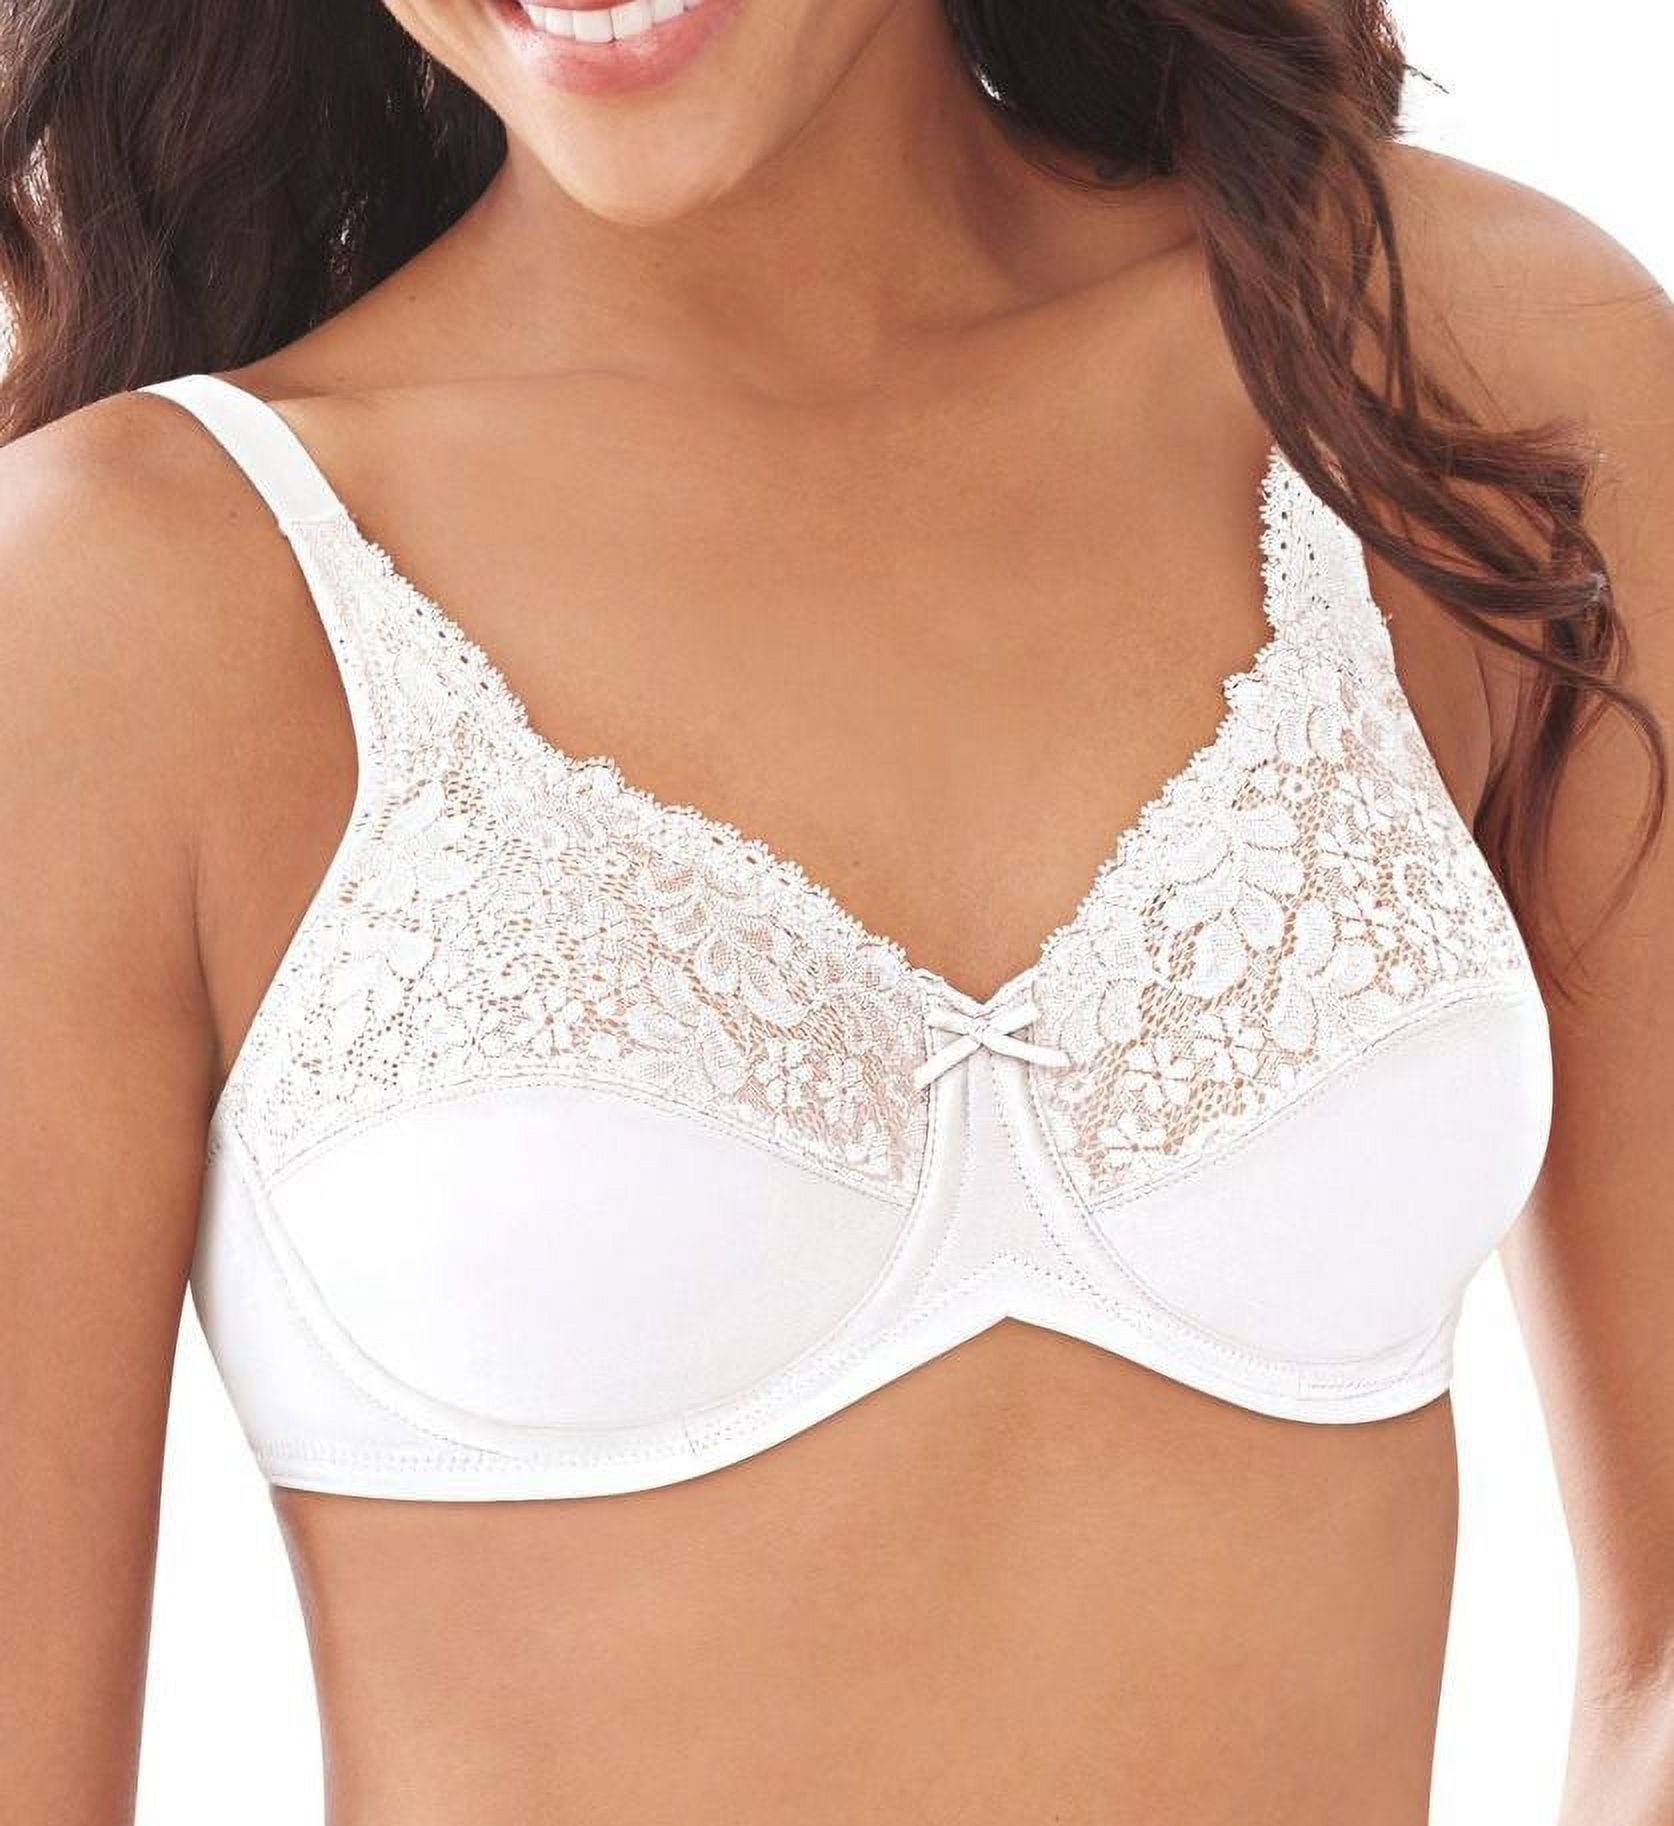 NWT LILYETTE by BALI MINIMIZER underwire BRA 0428 in WHITE the lily fit